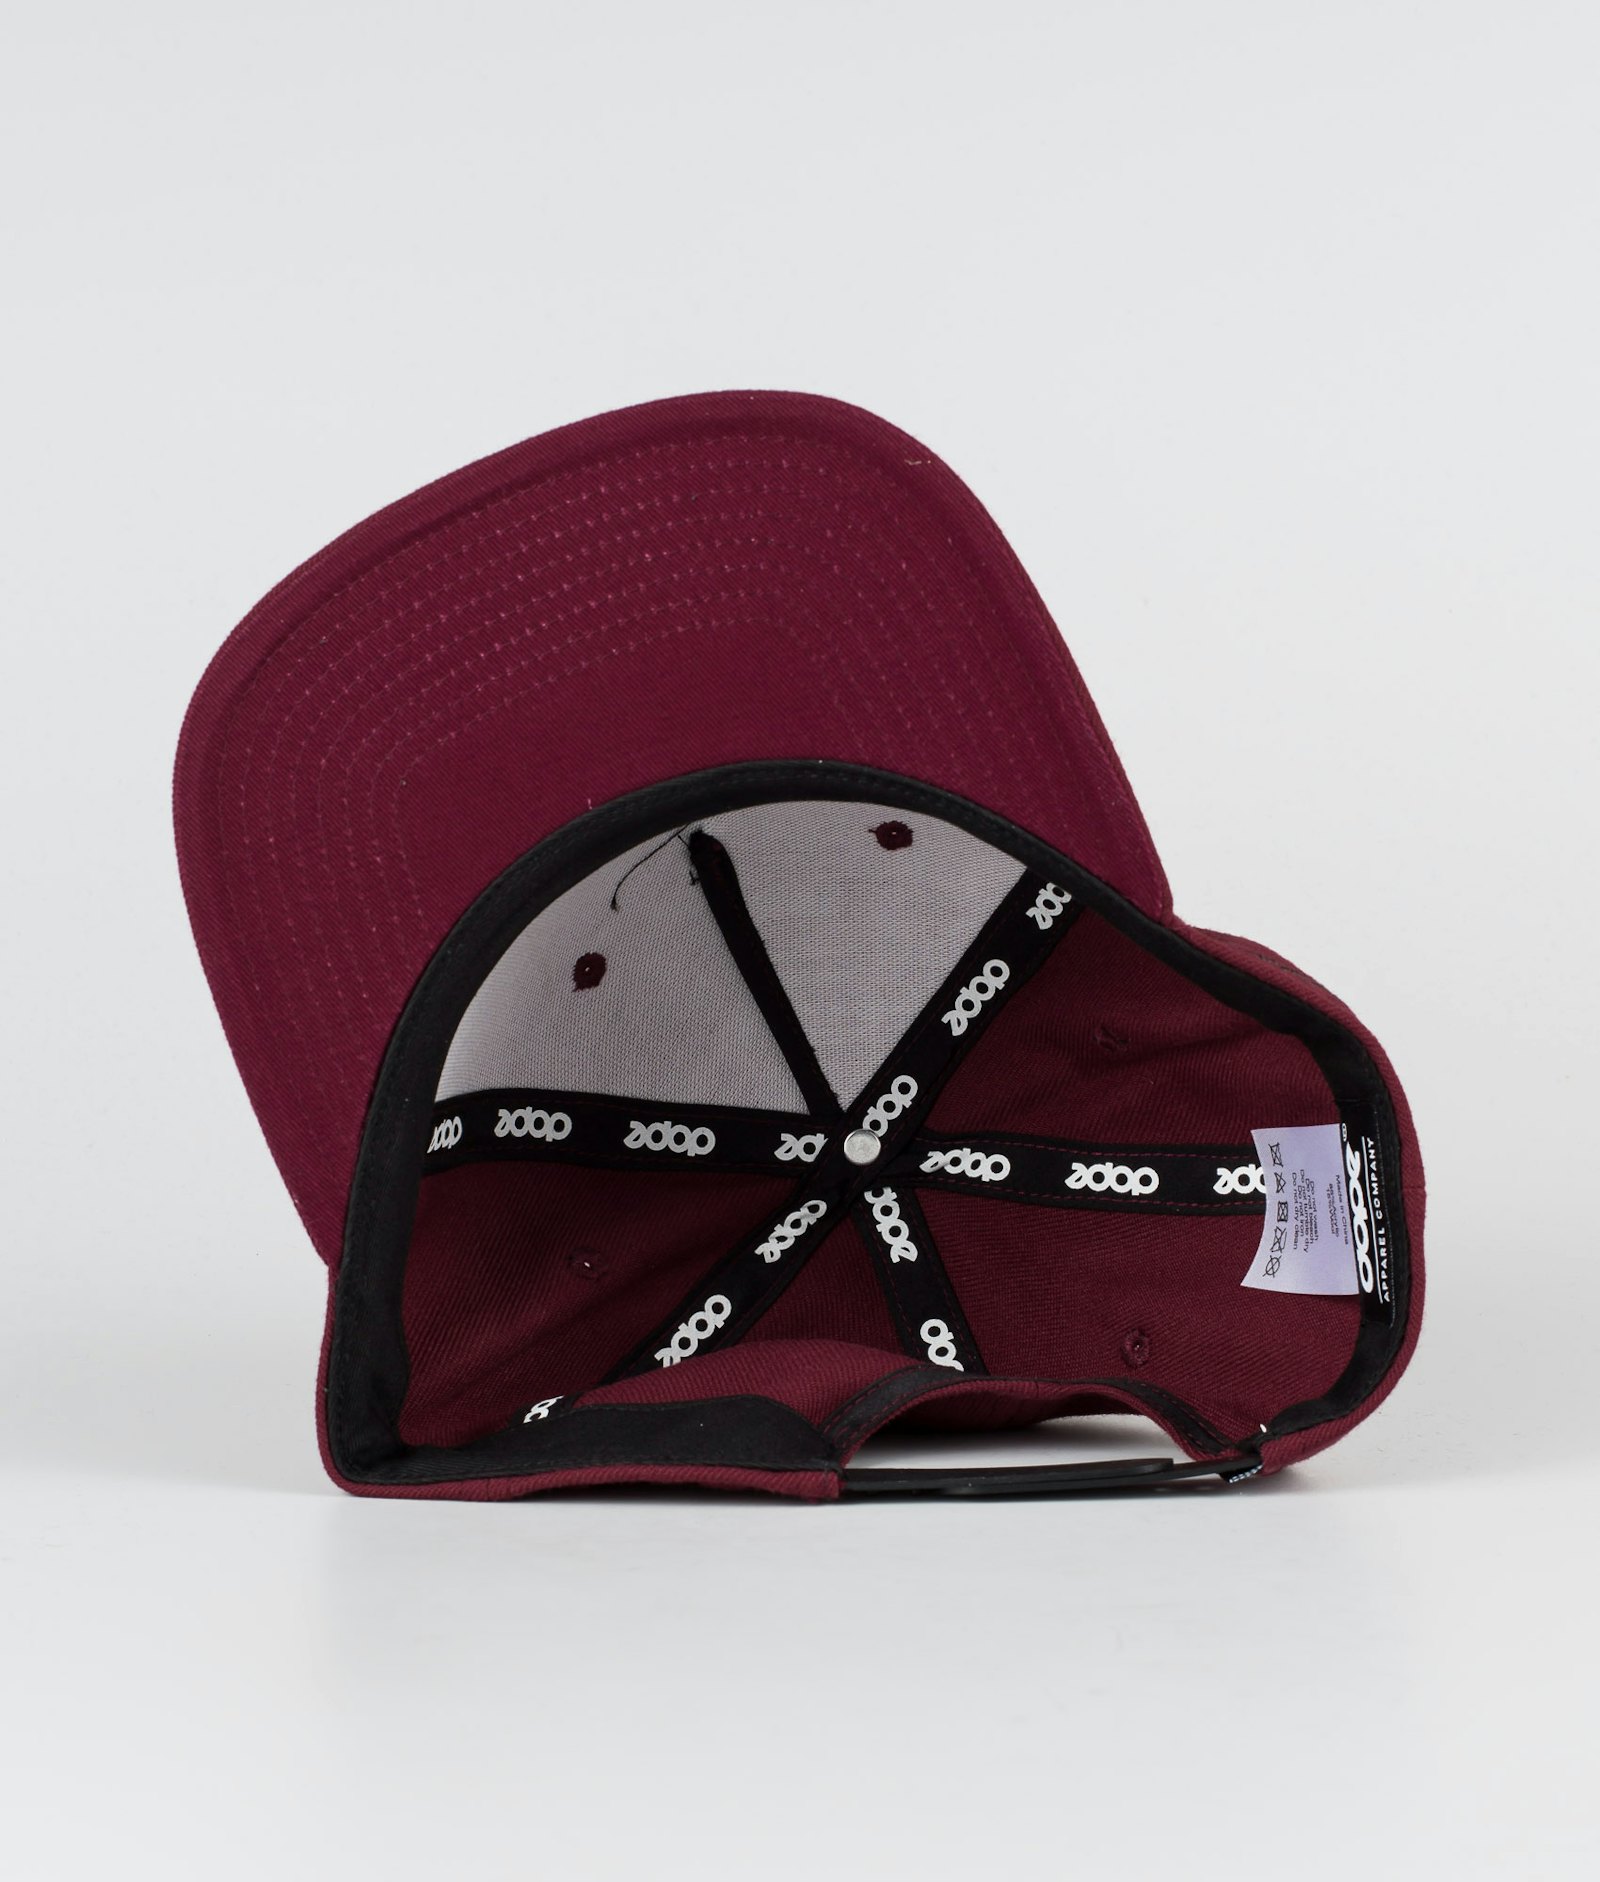 Dope Patched Cap Burgundy